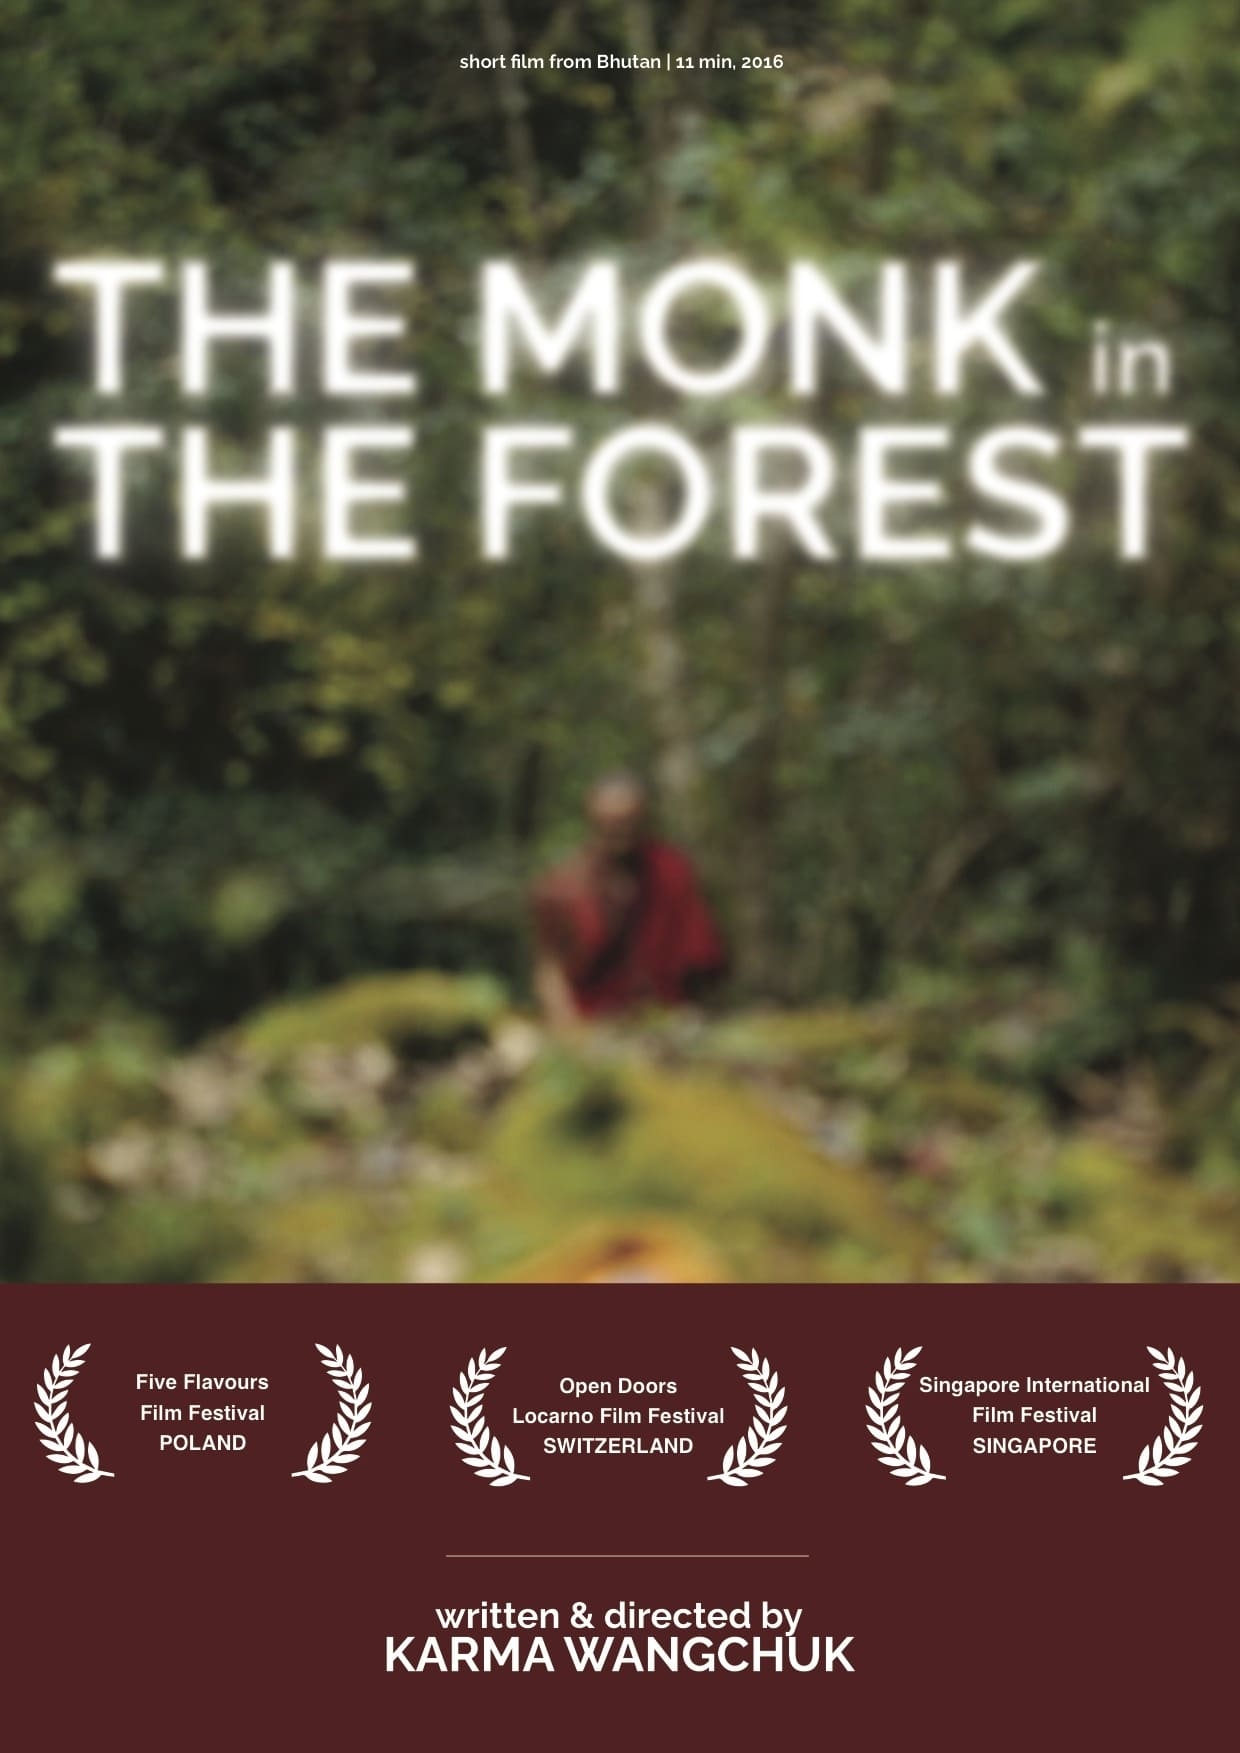 Monk in the Forest